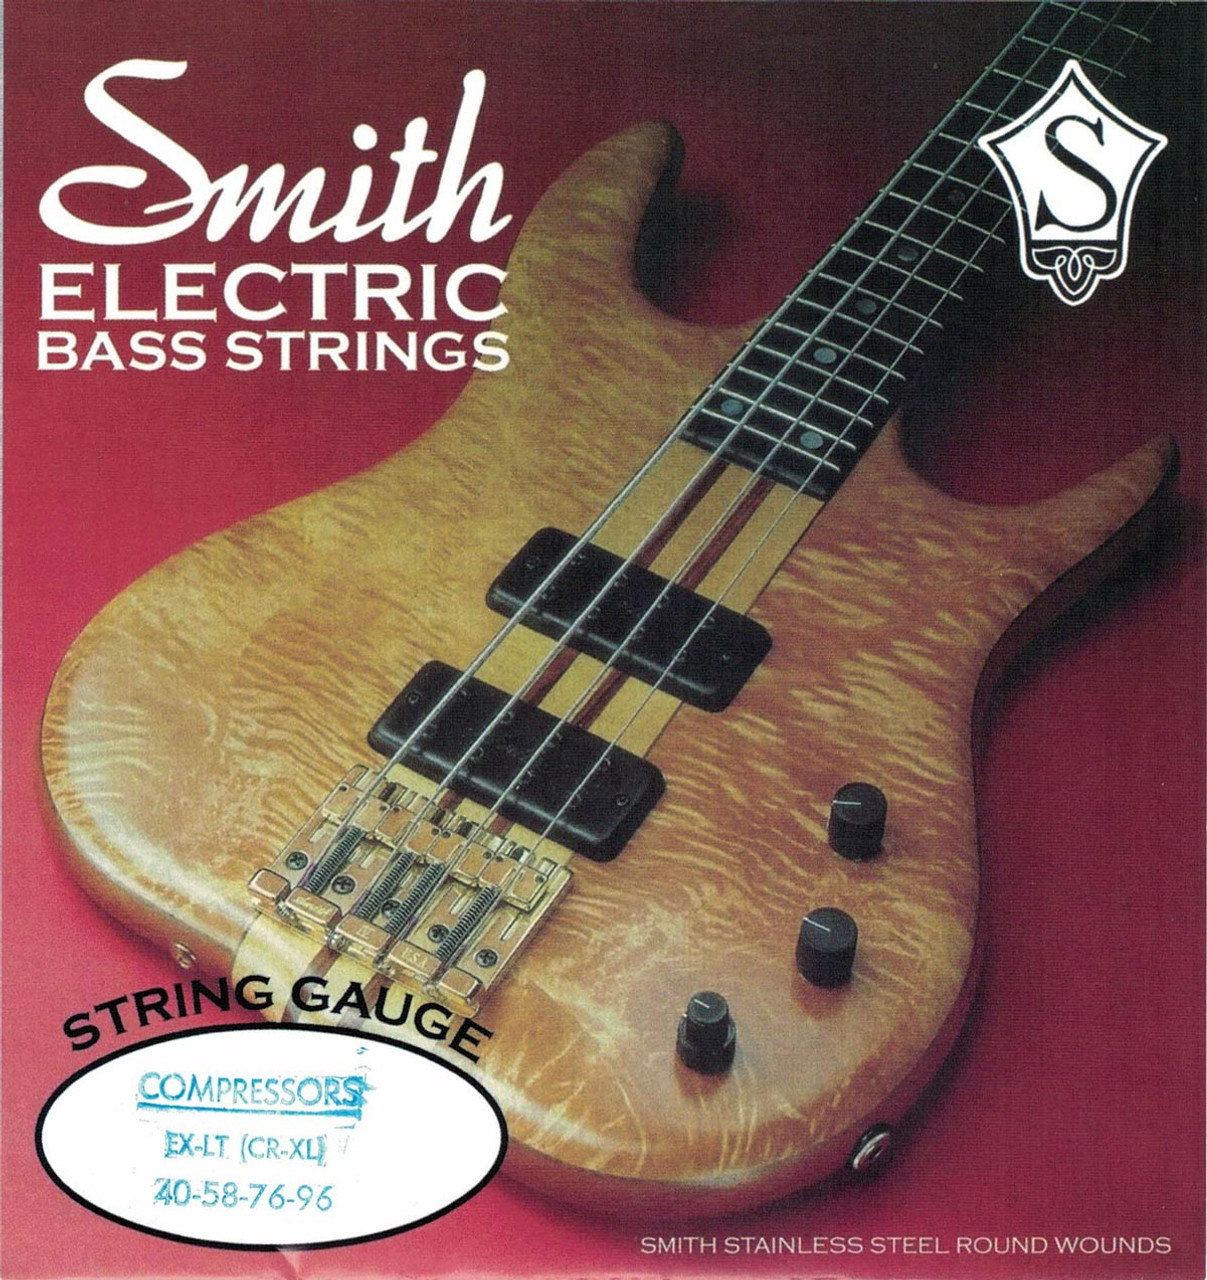 extra strings in bass accessories